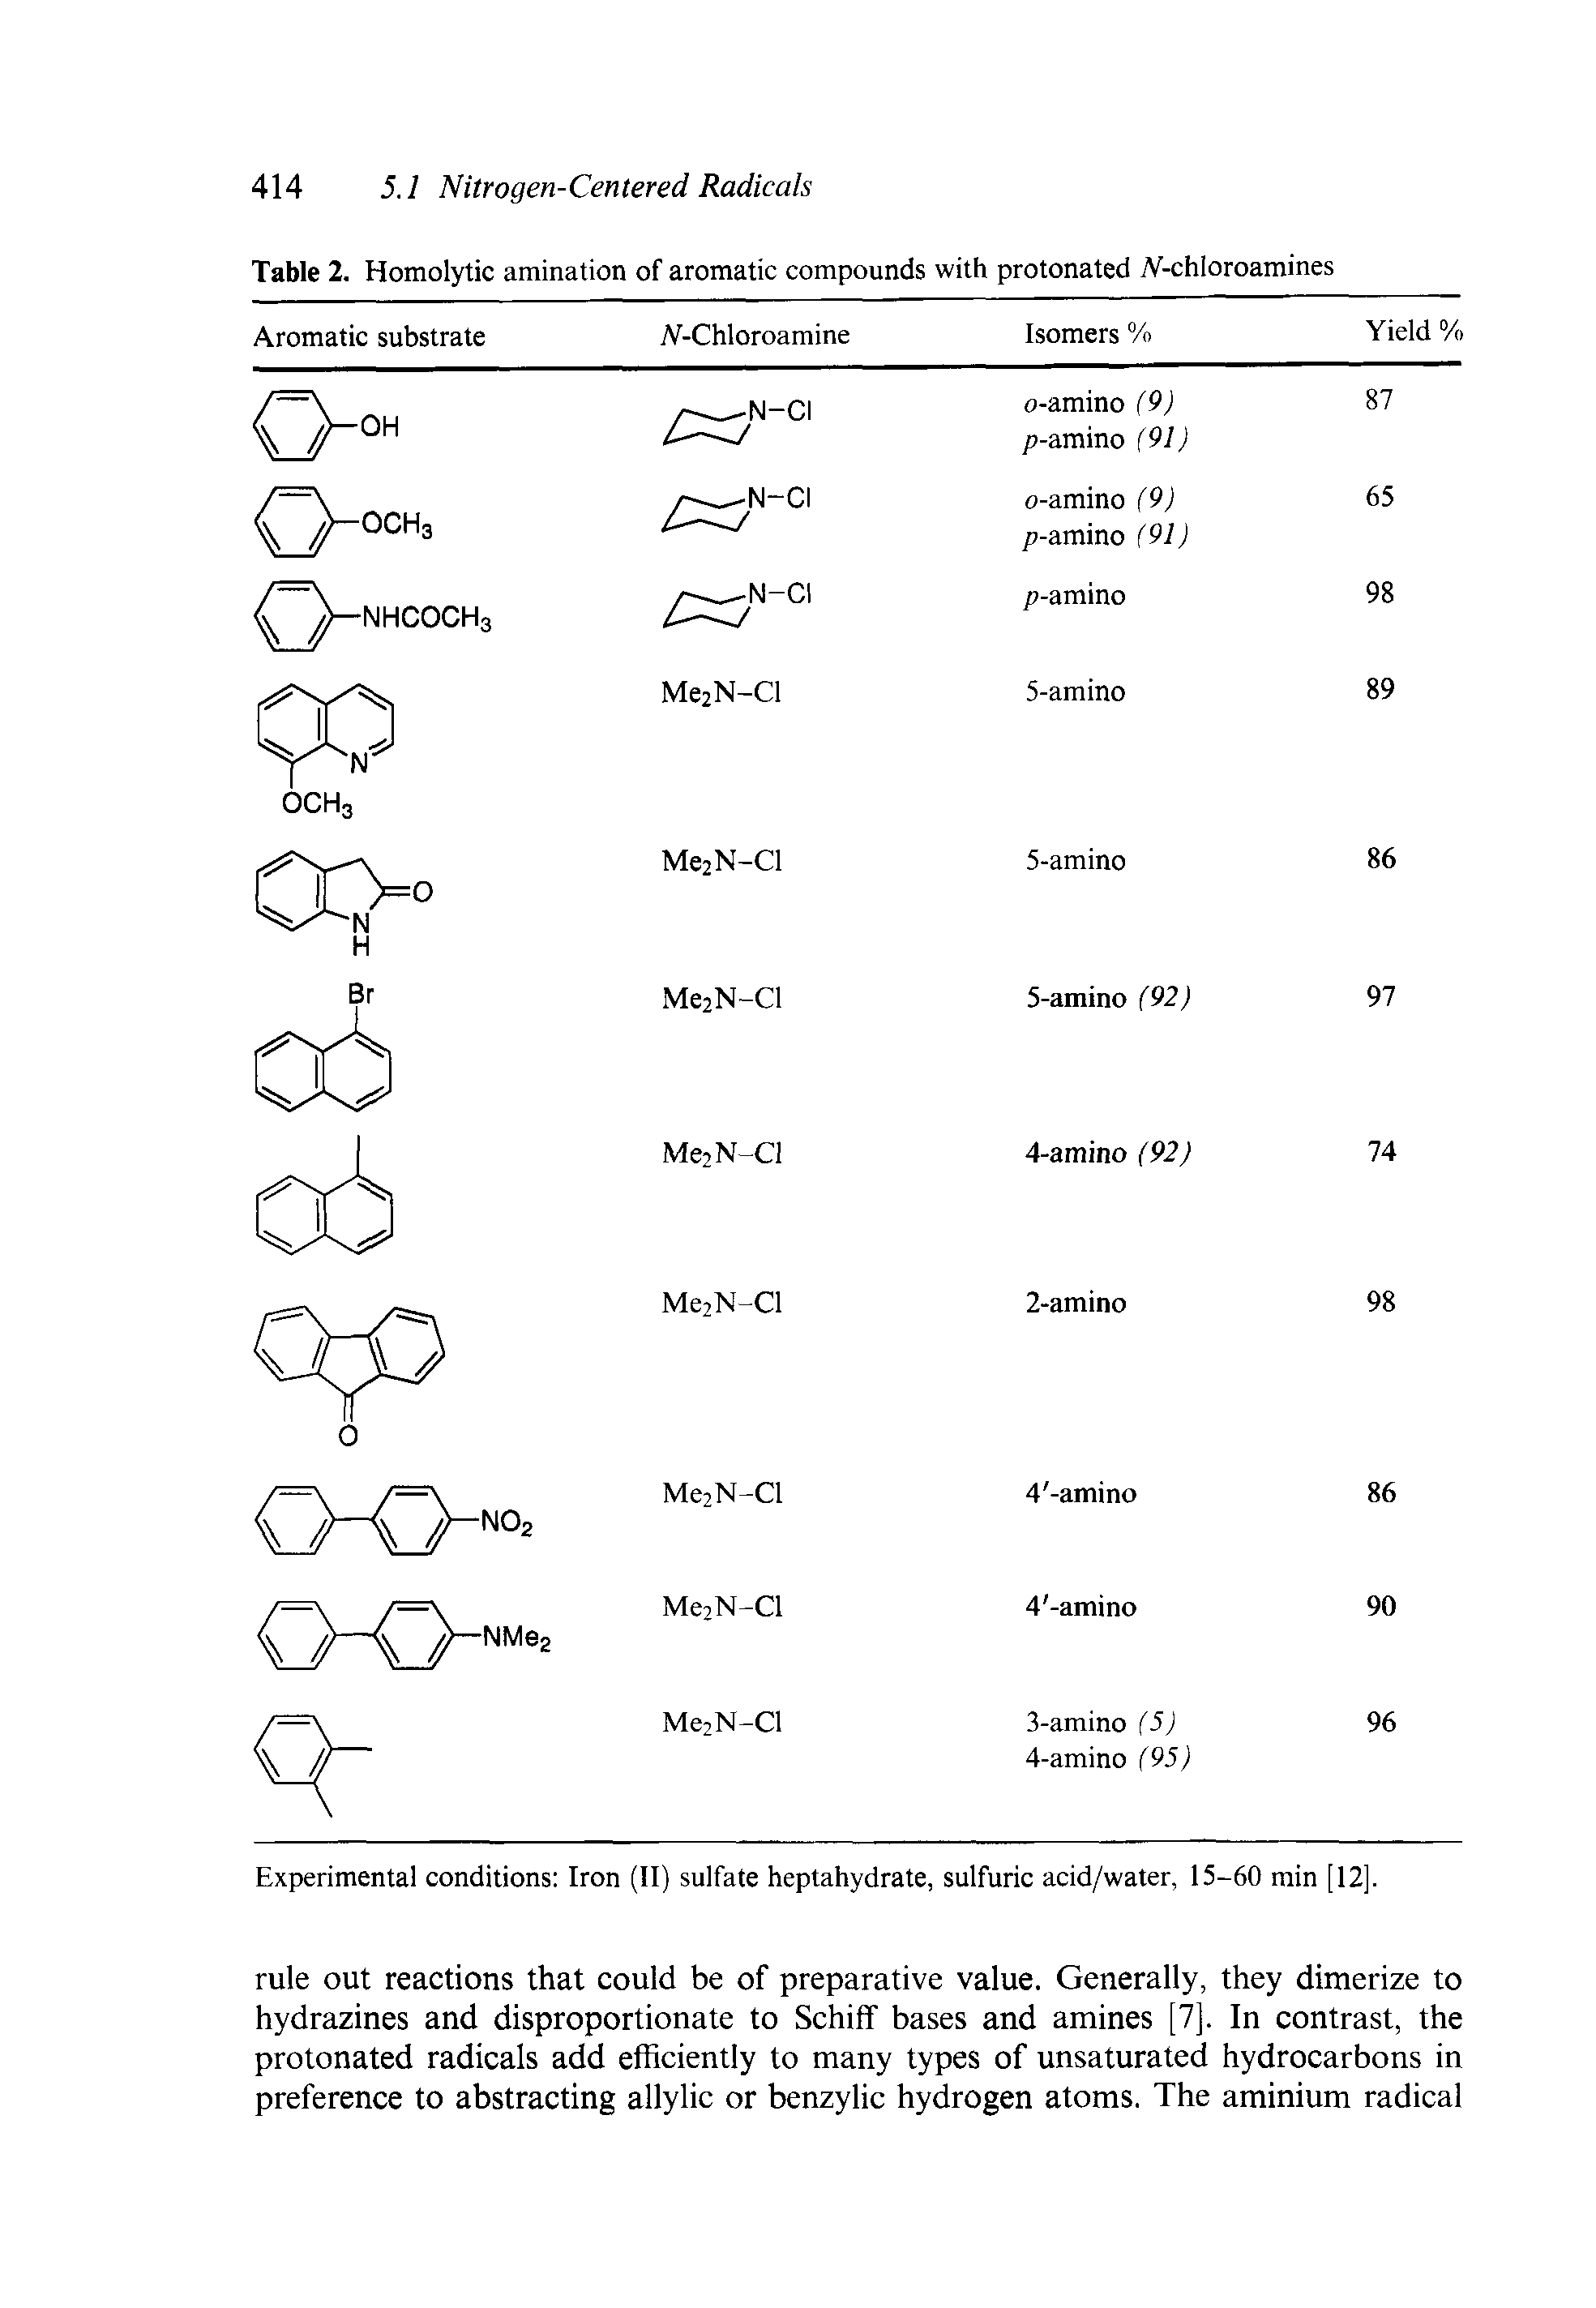 Table 2. Homolytic amination of aromatic compounds with protonated iV-chloroamines...